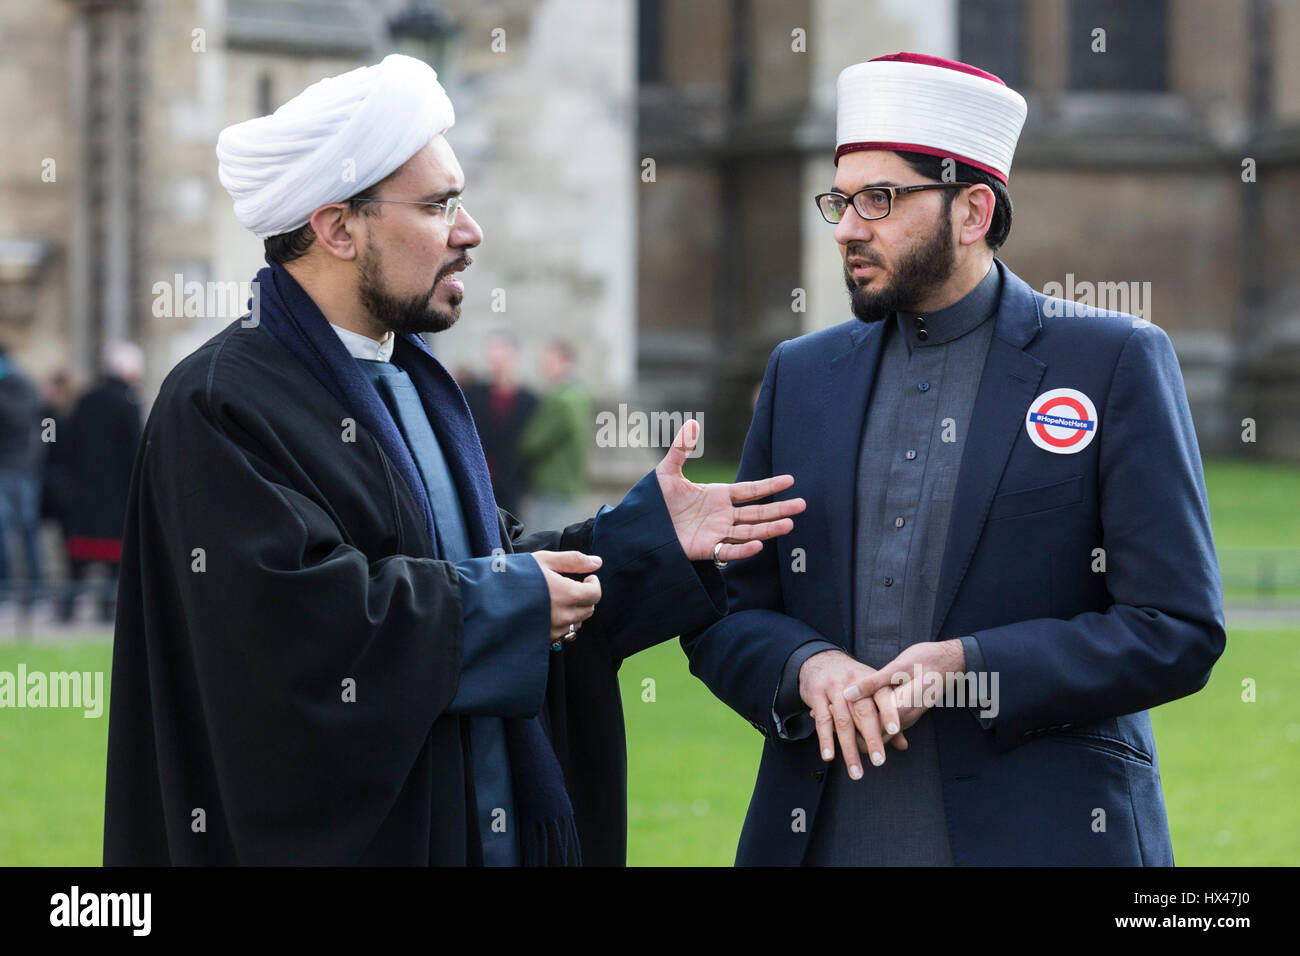 London, UK. 24th Mar, 2017. Sheikh Mohammed Al-Hilli in conversation with Imam Qari Asim MBE. Jewish, Christian and Muslim leaders gathered outside Westminster Abbey to condemn the terrorist attack on Westminster Bridge which happened days earlier. Credit: Bettina Strenske/Alamy Live News Stock Photo